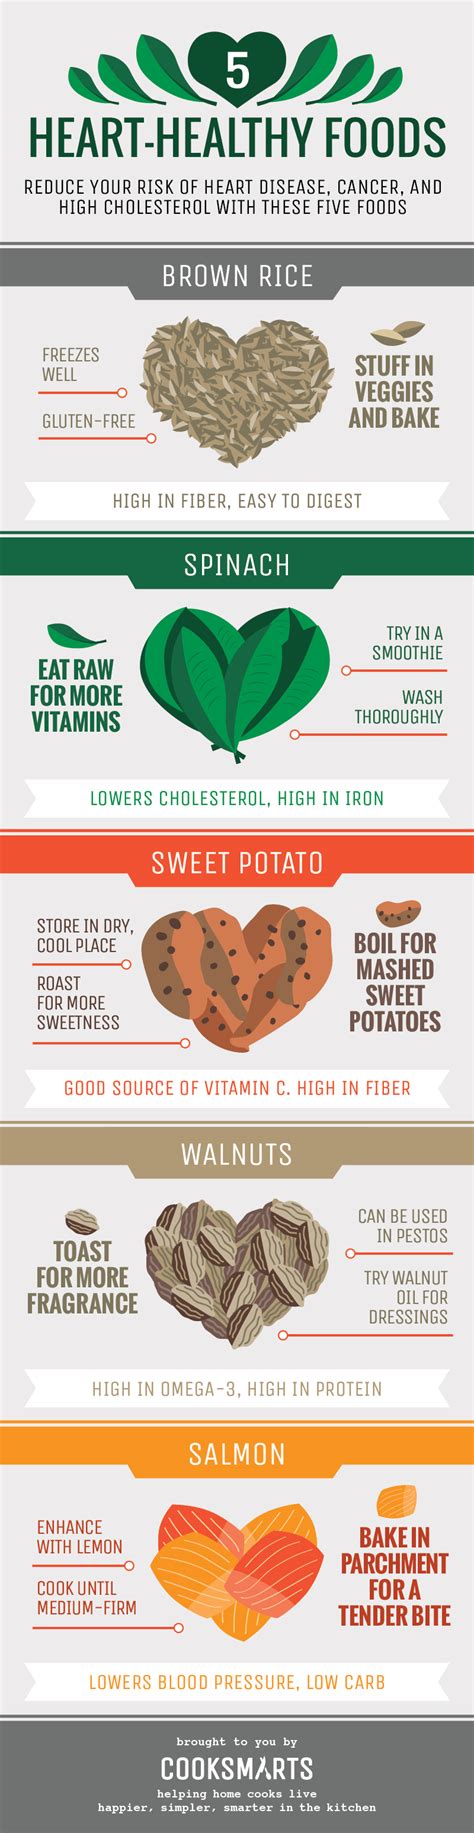 25 Food And Cooking Infographics Thatll Make Your Life Easier Page 6 Of 6